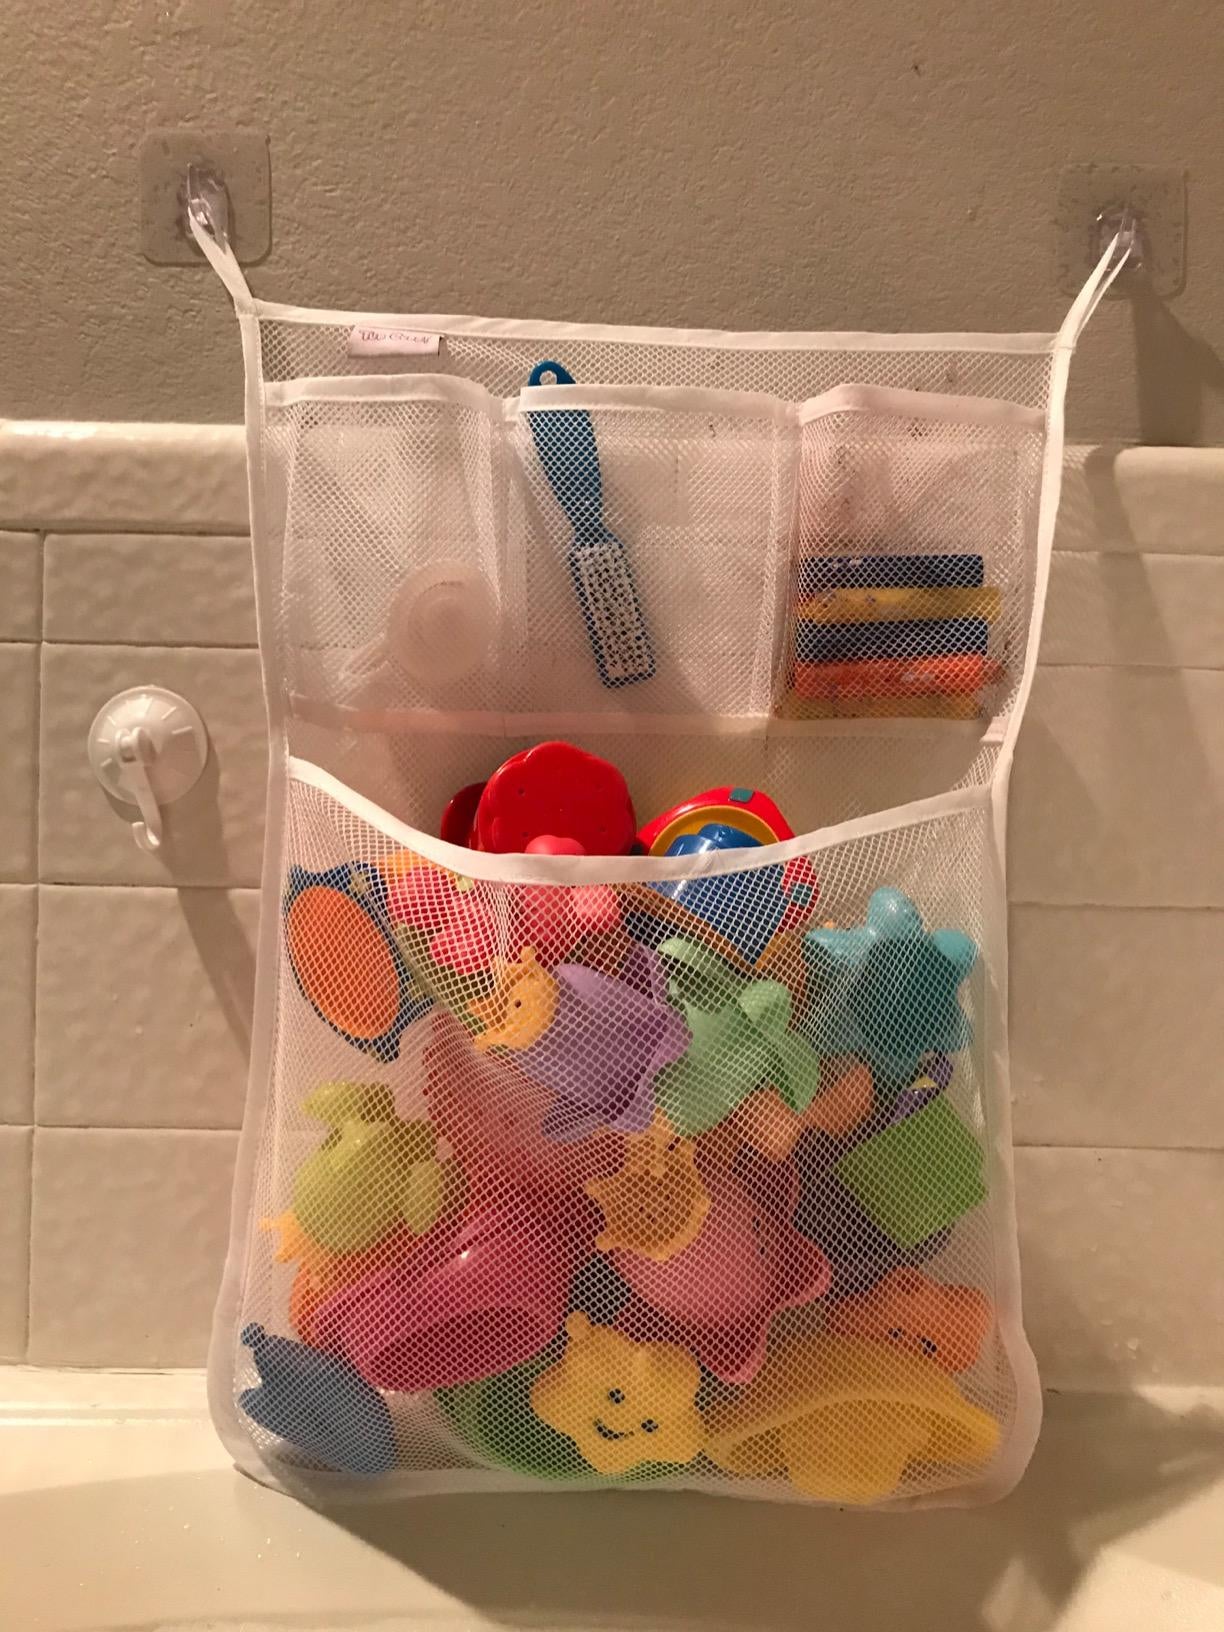 reviewer's photo of a mesh organizer containing bath toys and stuck to the wall